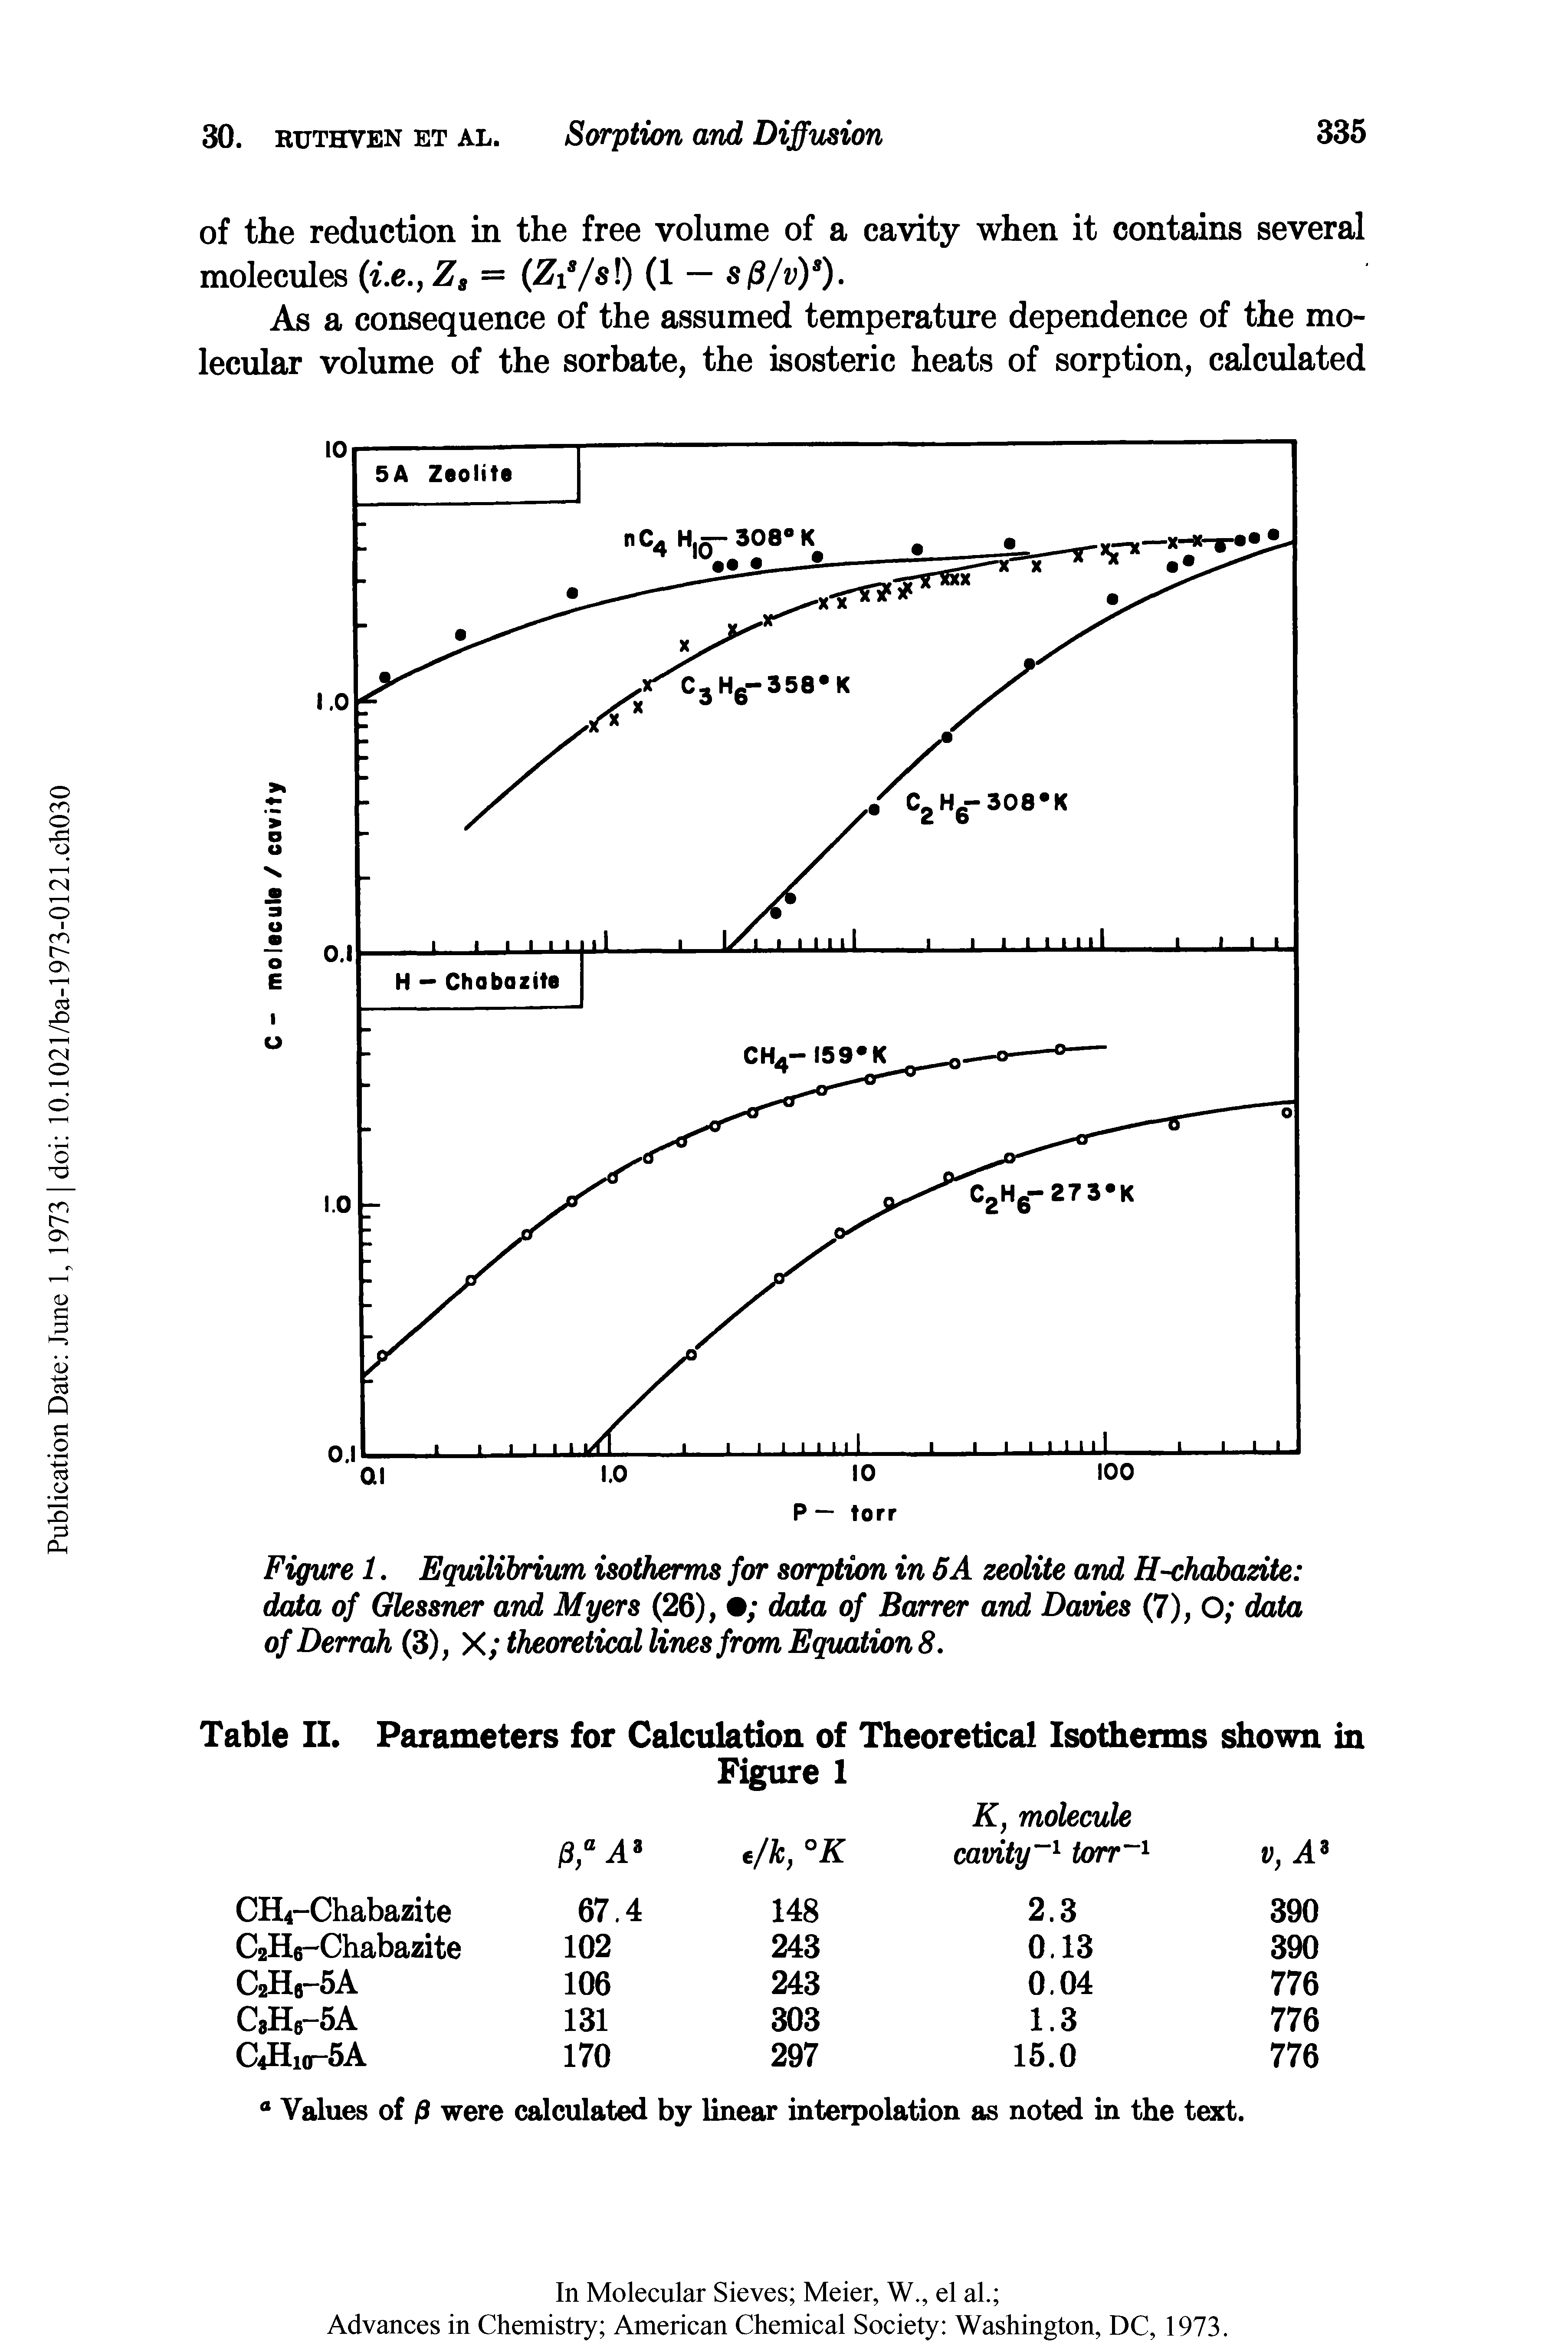 Figure 1. Equilibrium isotherms for sorption in 5A zeolite and H-chabadte data of Glessner and Myers (26), data of Barrer and Davies (7), O data of Derrah (3), X theoretical lines from Equation 8.